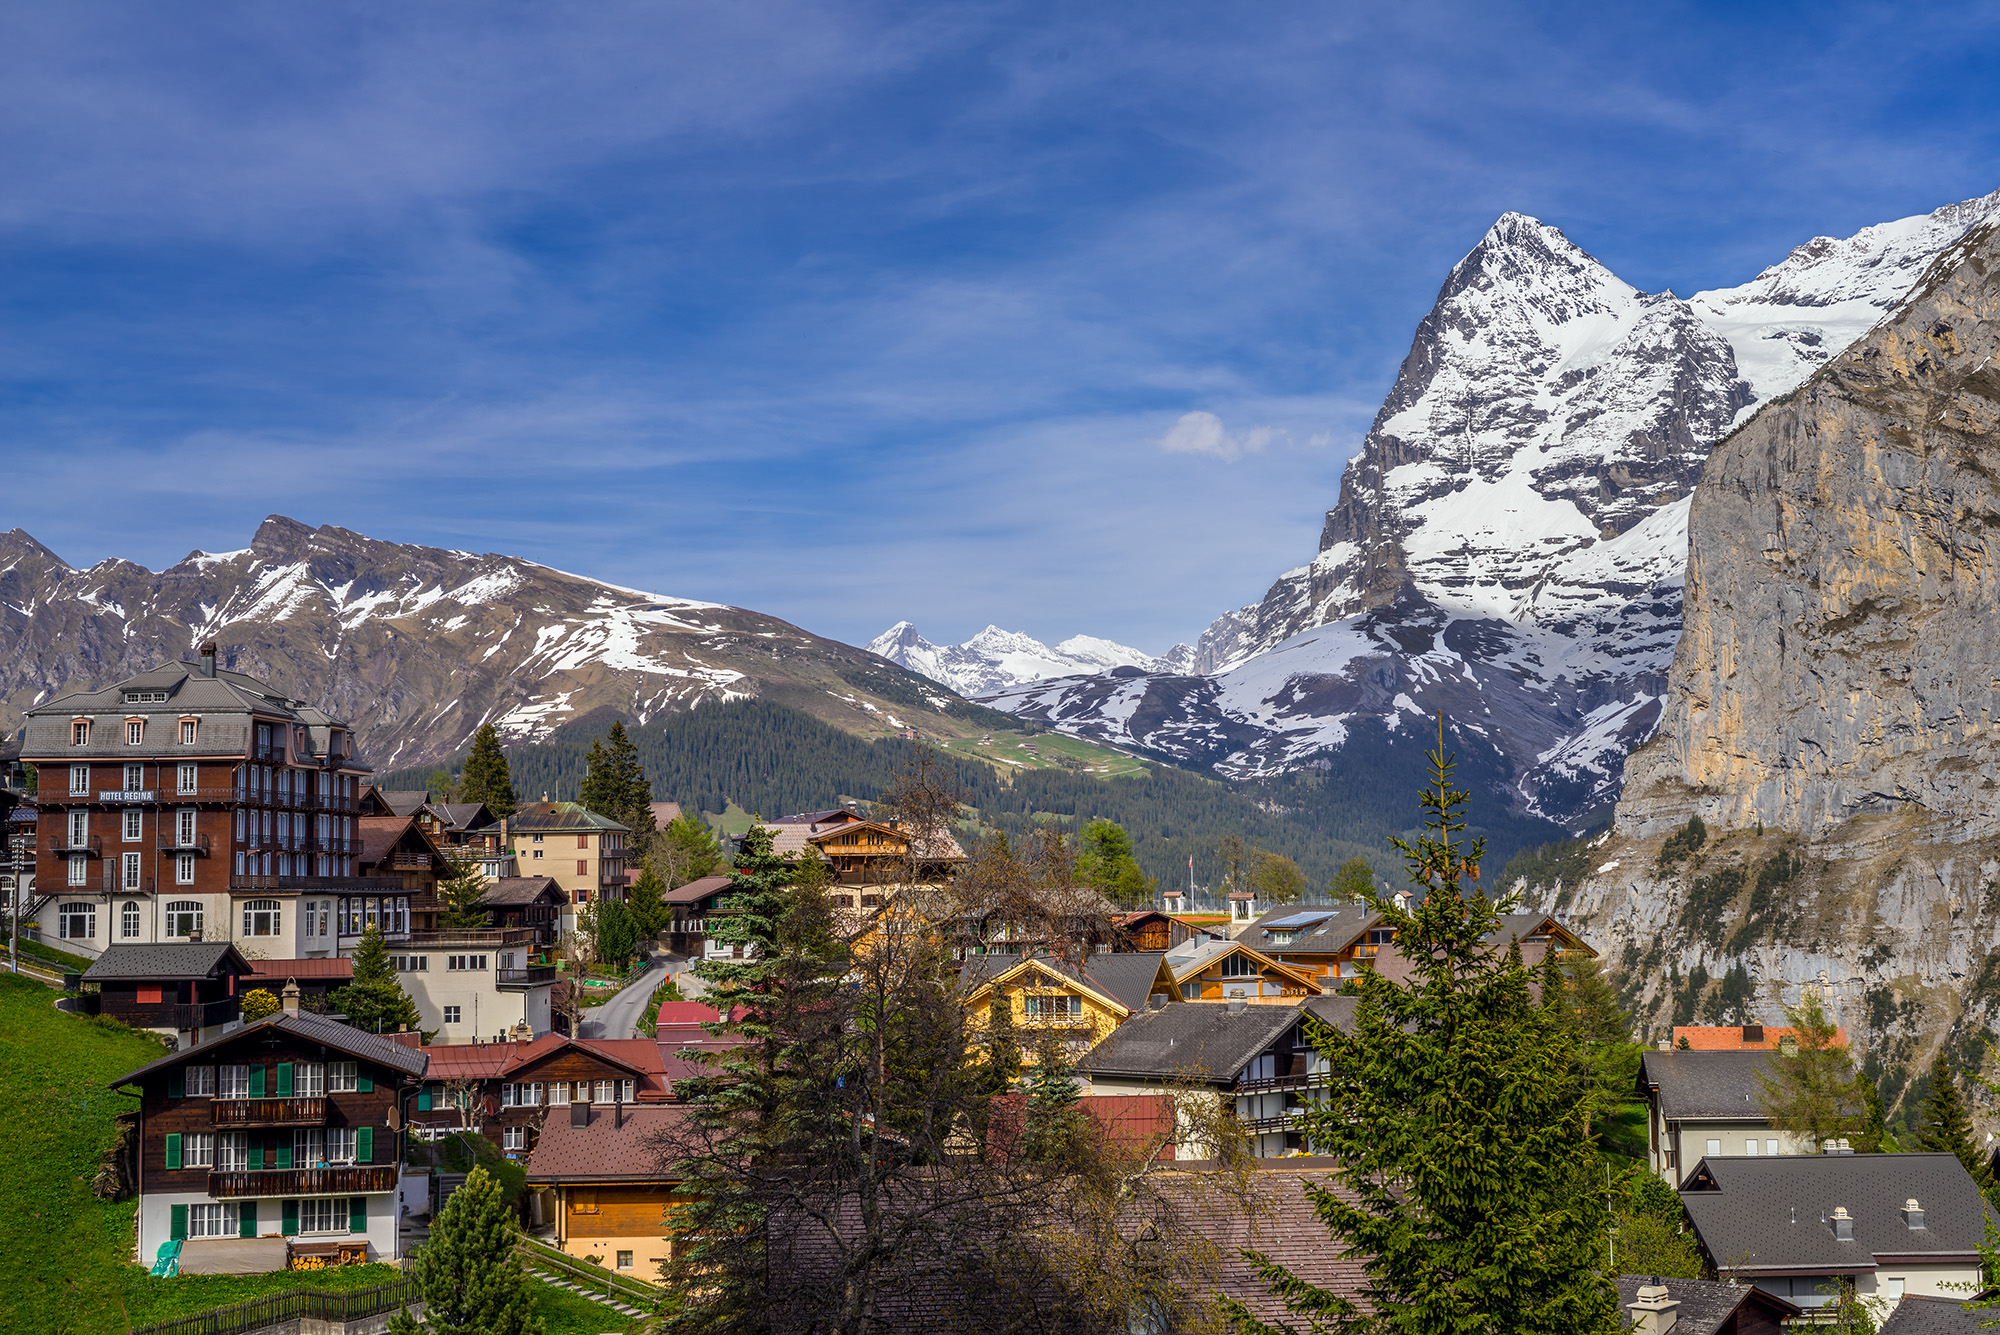 In "Mürren's Alpine Ascent," I capture the essence of a crisp morning in the charming Swiss village of Mürren. The Eiger mountain...